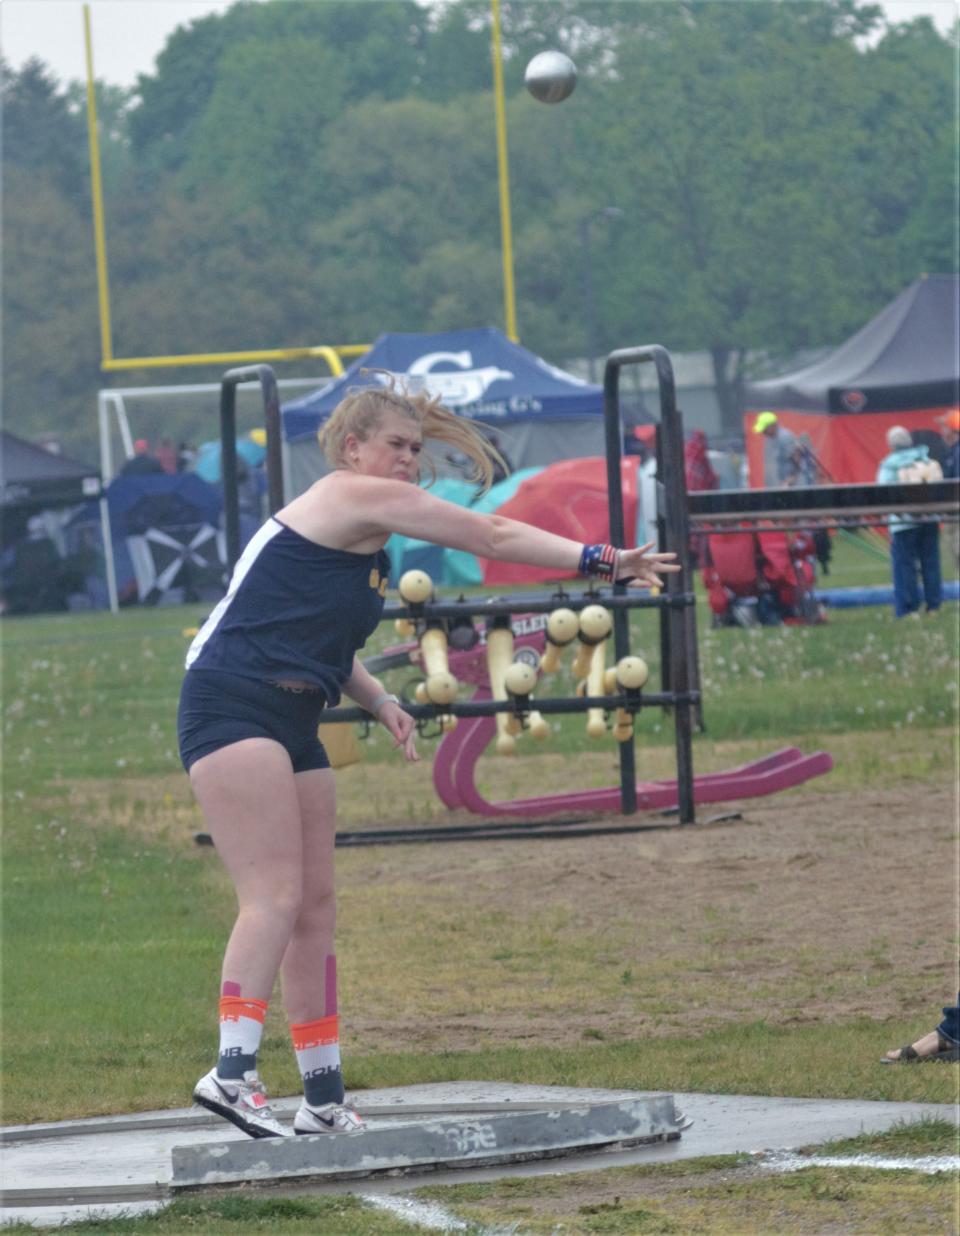 Ella Moylan will be among the top field athletes for Gaylord this season, hoping for a chance to compete at the D2 state finals after just missing the cut last season.